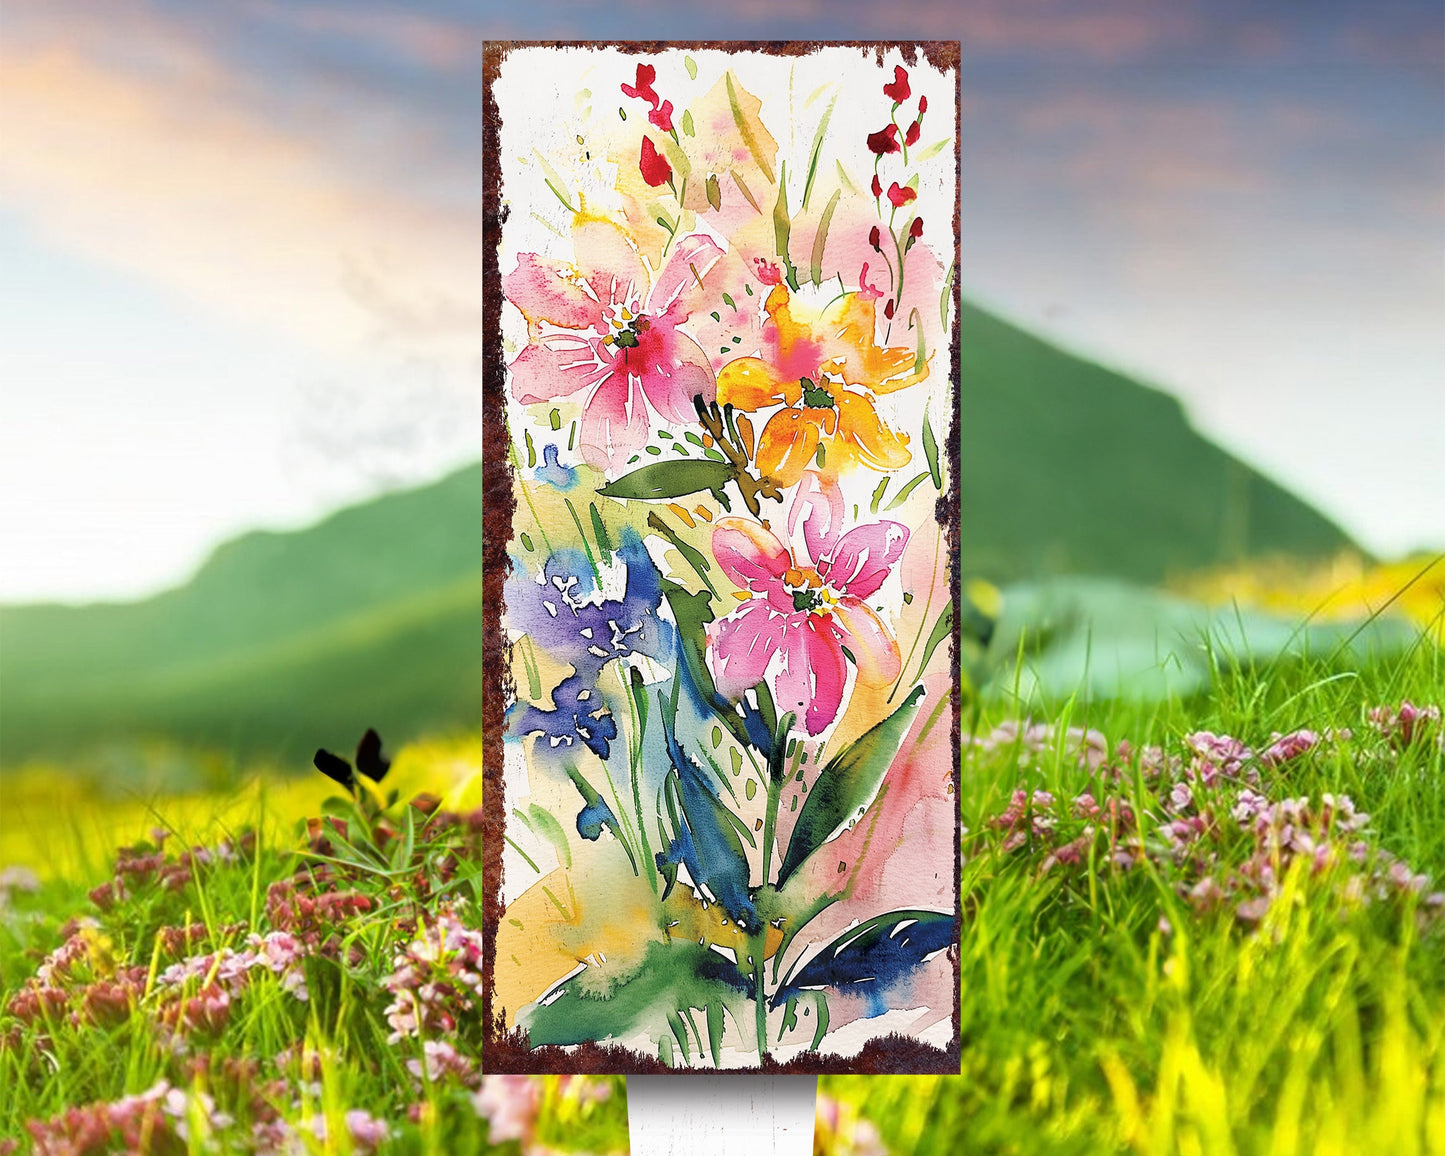 26in Spring Garden Stake | Fireweed Watercolor Floral Decor | Perfect for Outdoor Decor, Yard Art, and Garden Decorations